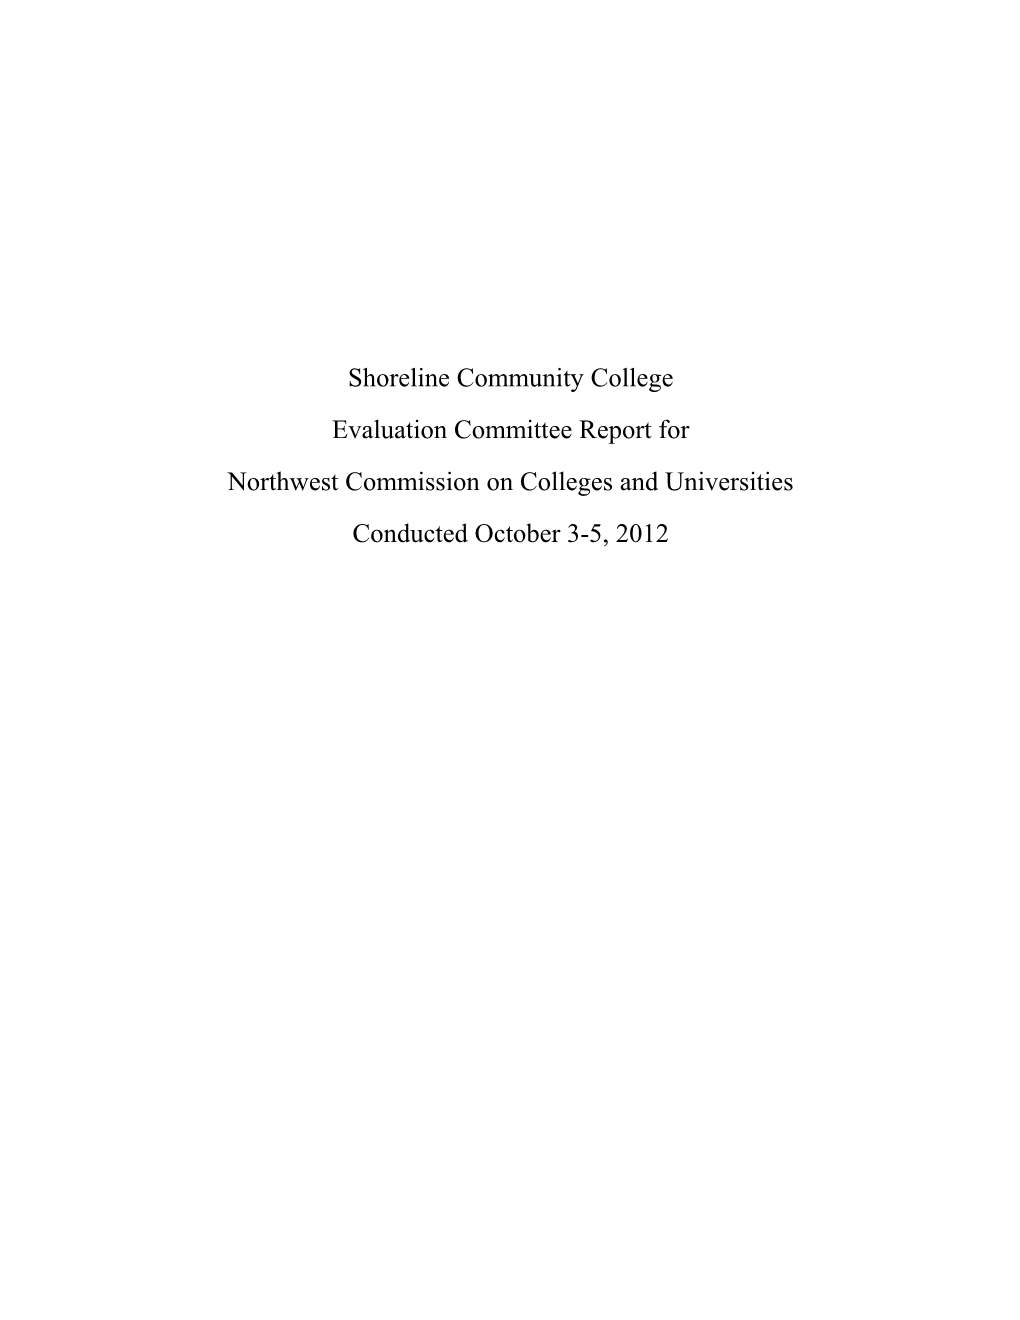 Evaluation Committee Report For